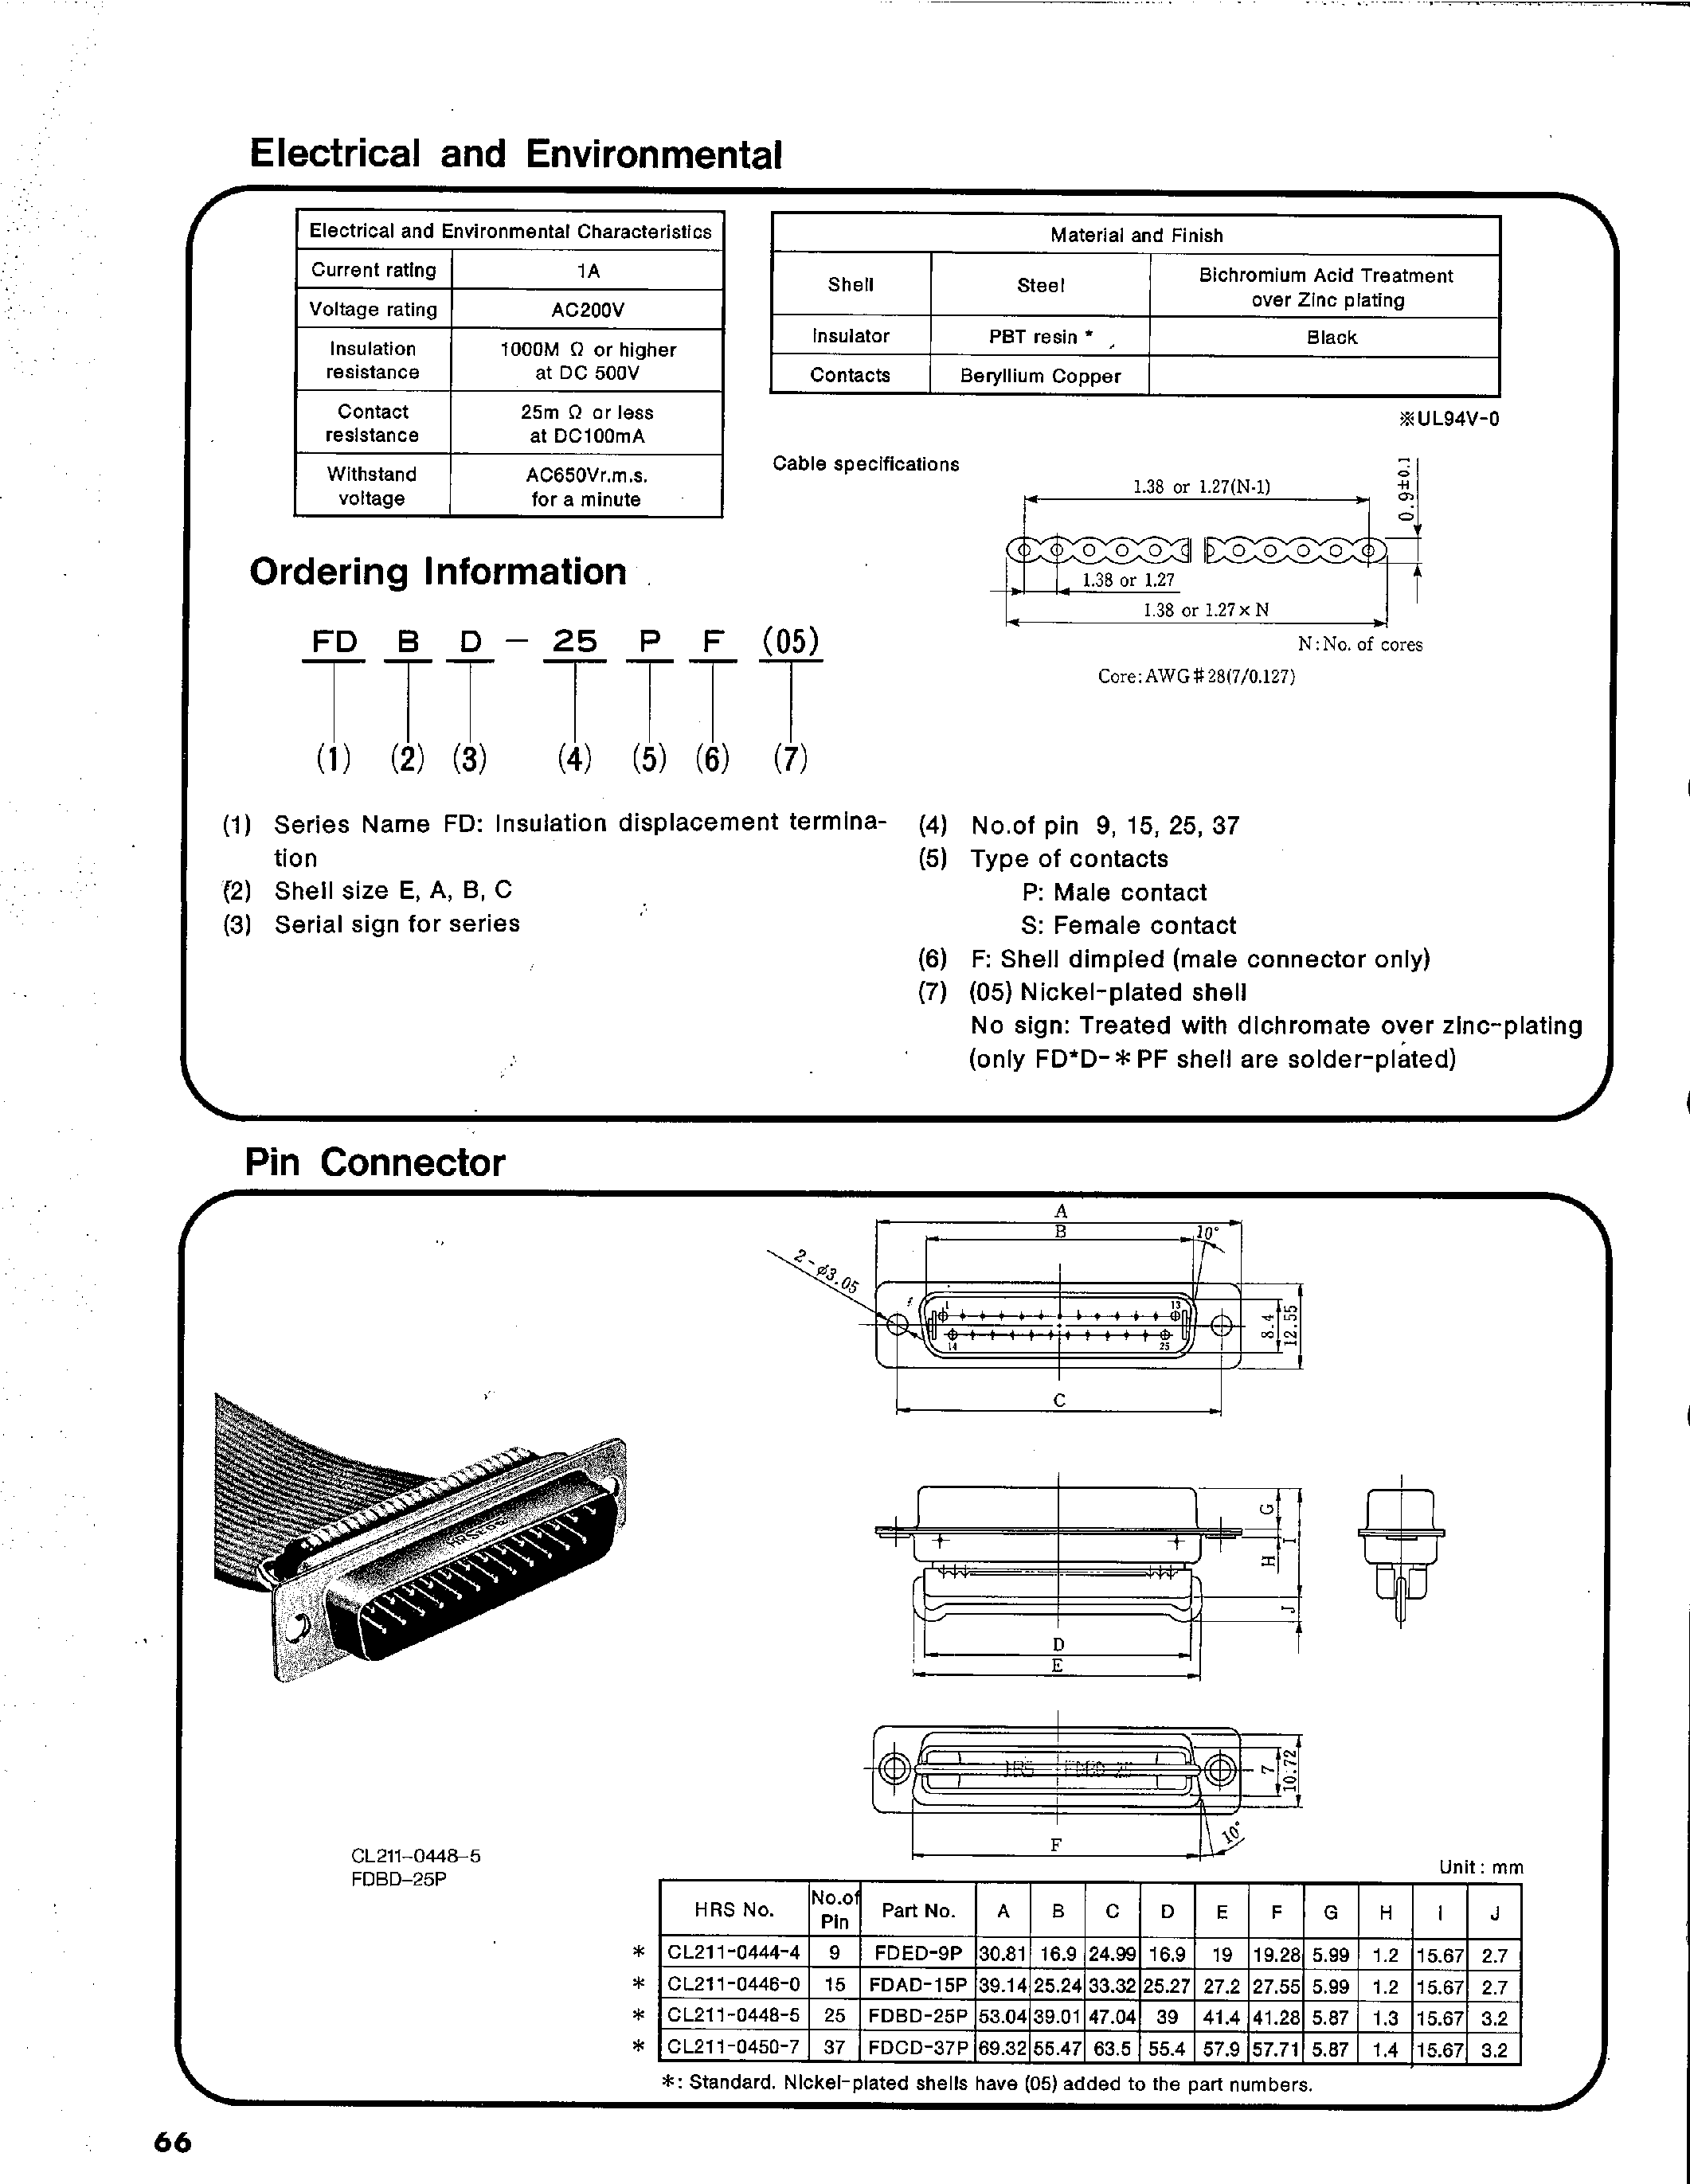 Datasheet FDBD-9SF - RIBBON-CABLE LOW-PROFILE FD CONNECTORS page 2